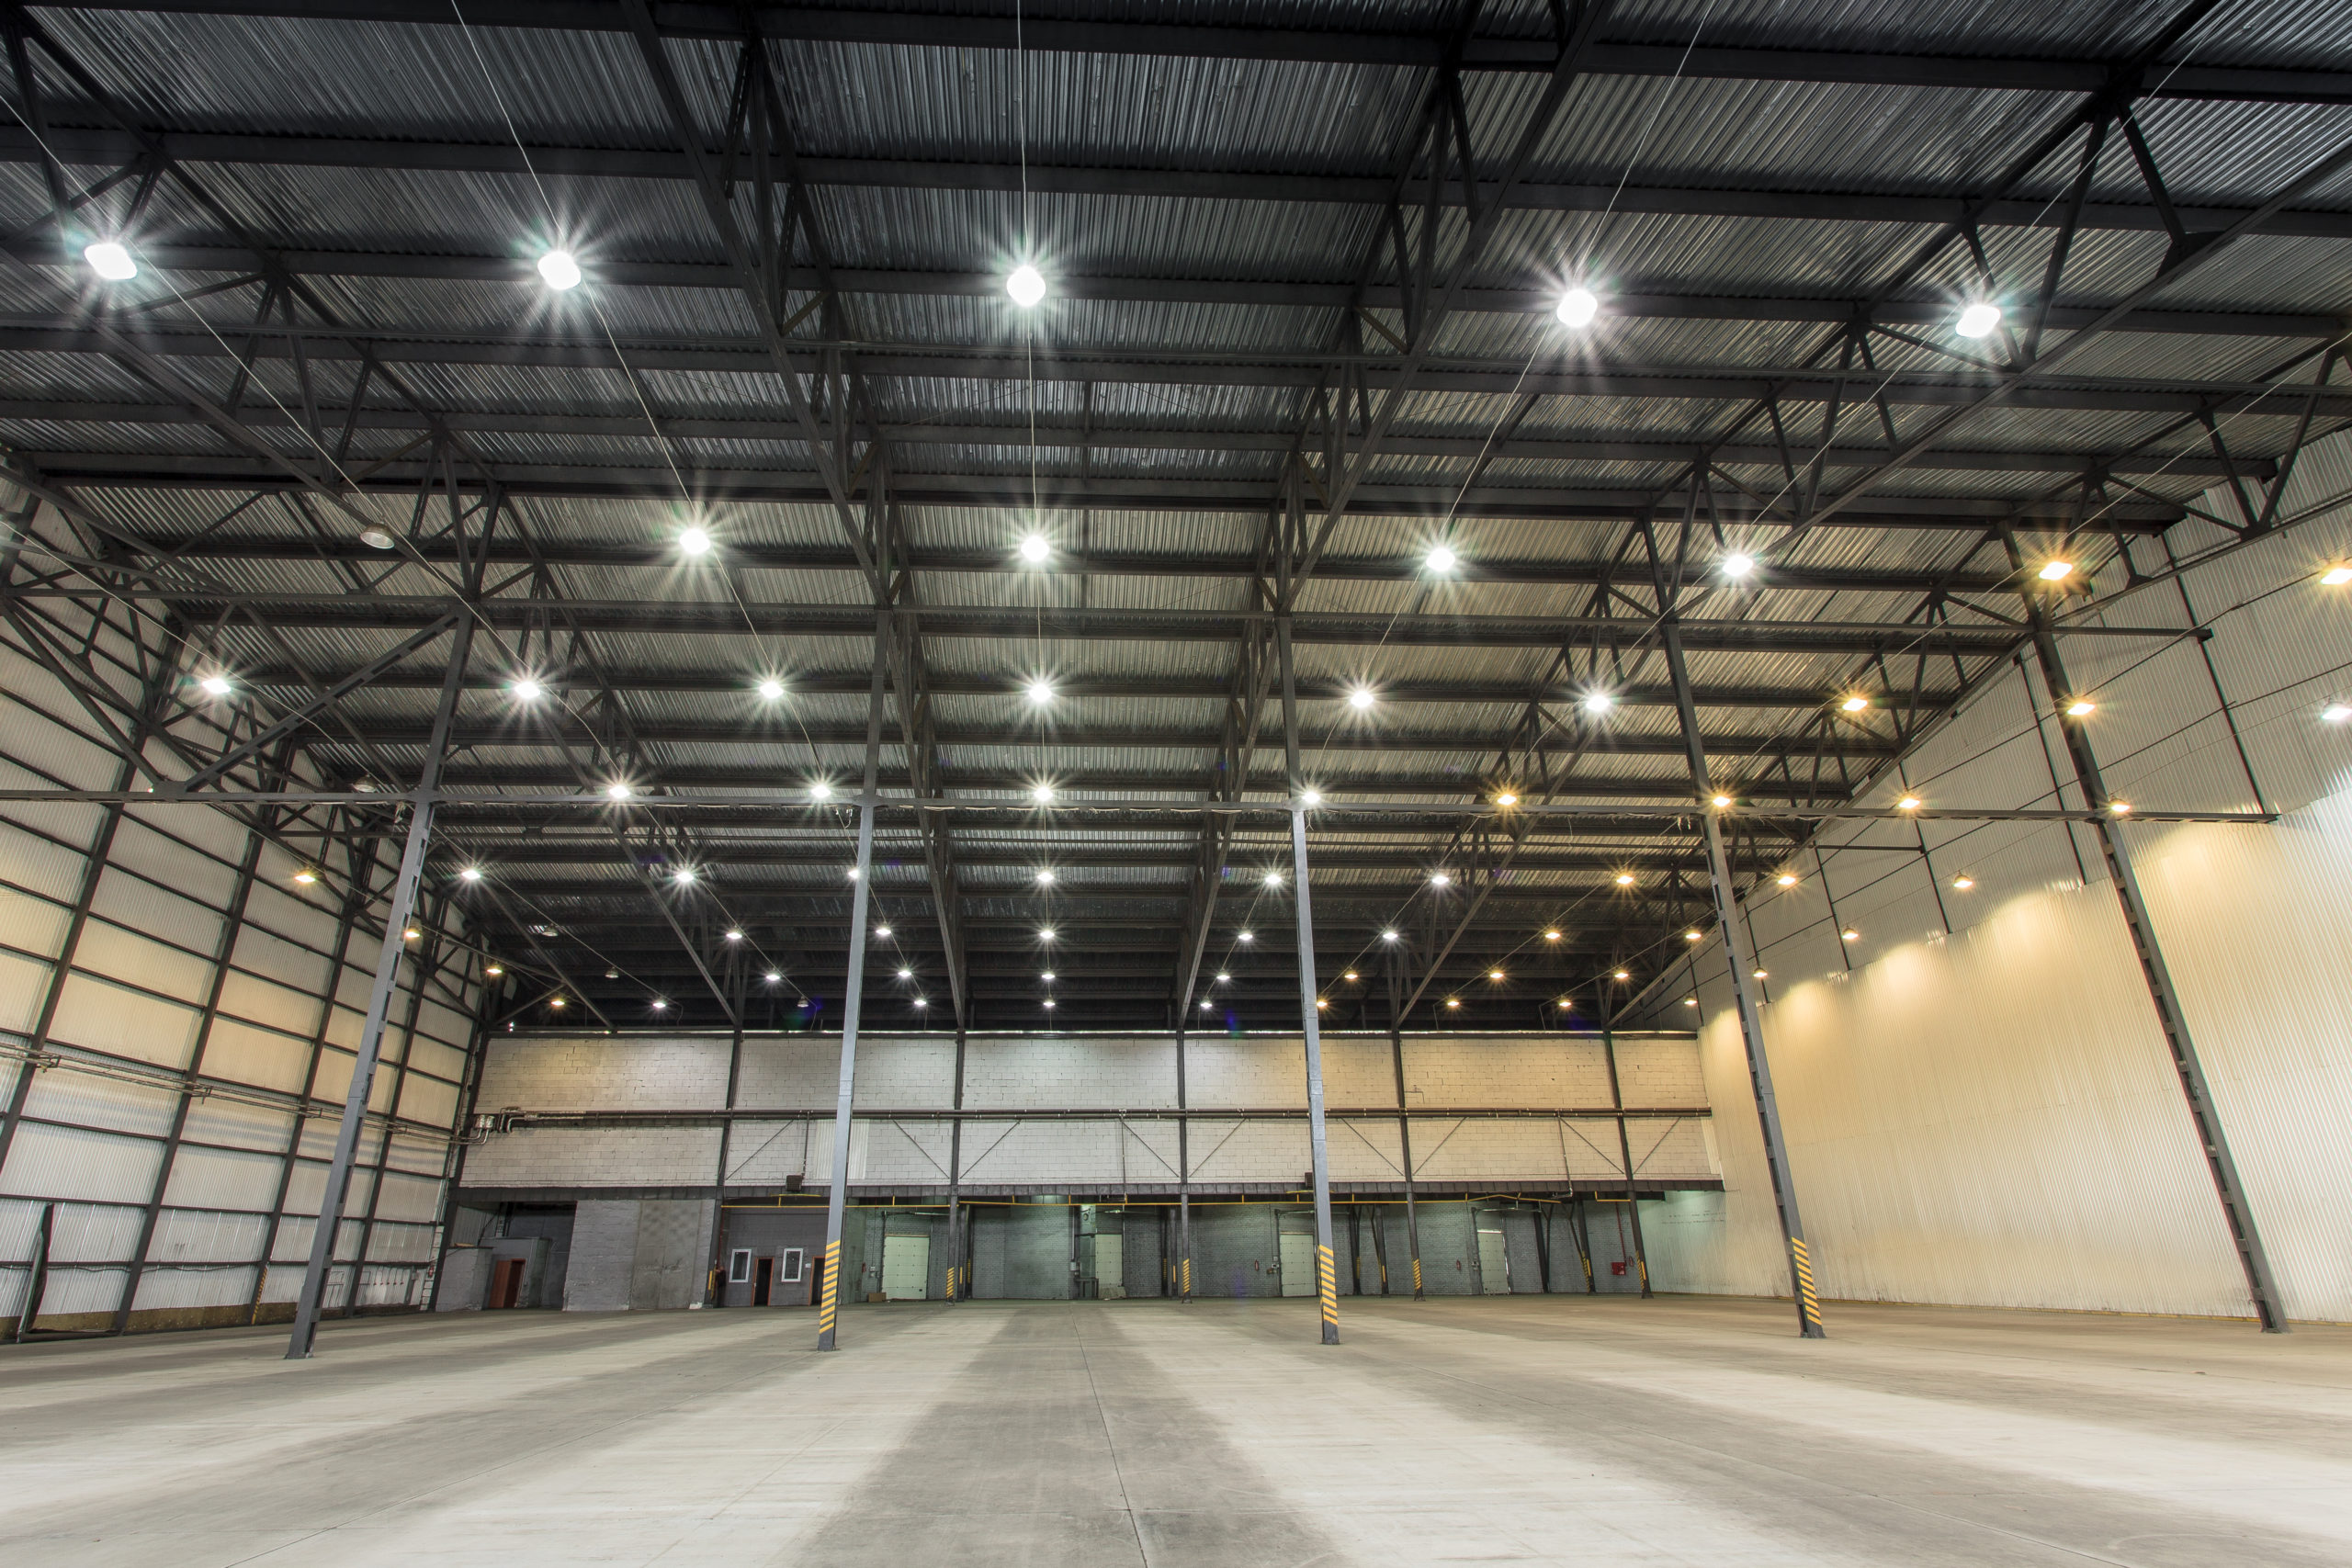 A large empty warehouse with many hanging lights on the ceiling